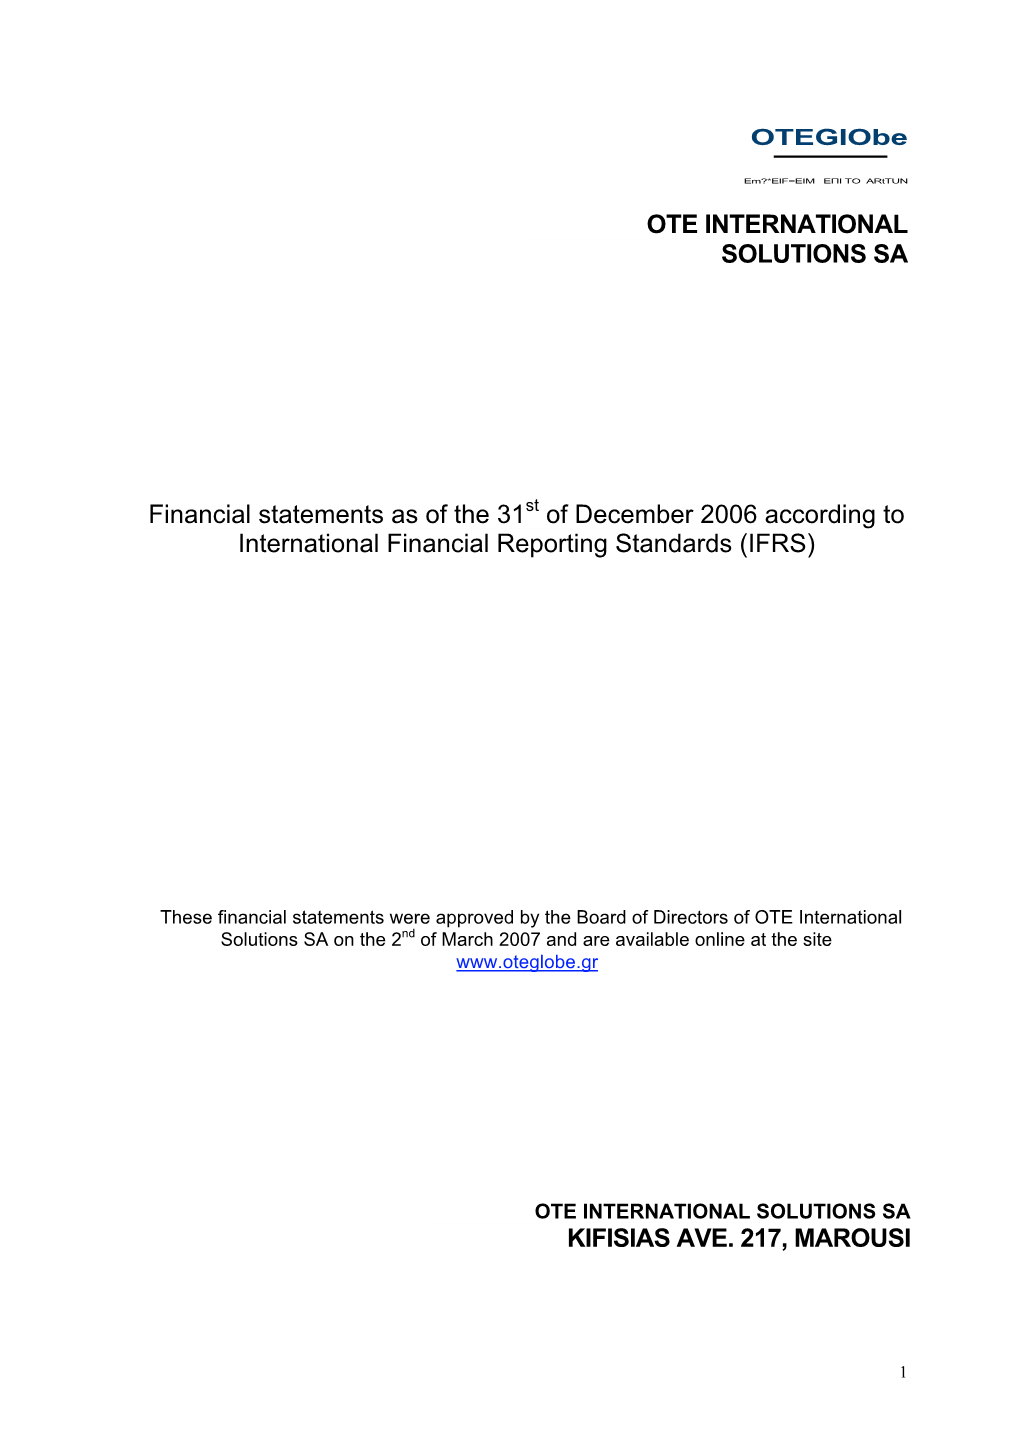 OTE INTERNATIONAL SOLUTIONS SA Financial Statements As of The